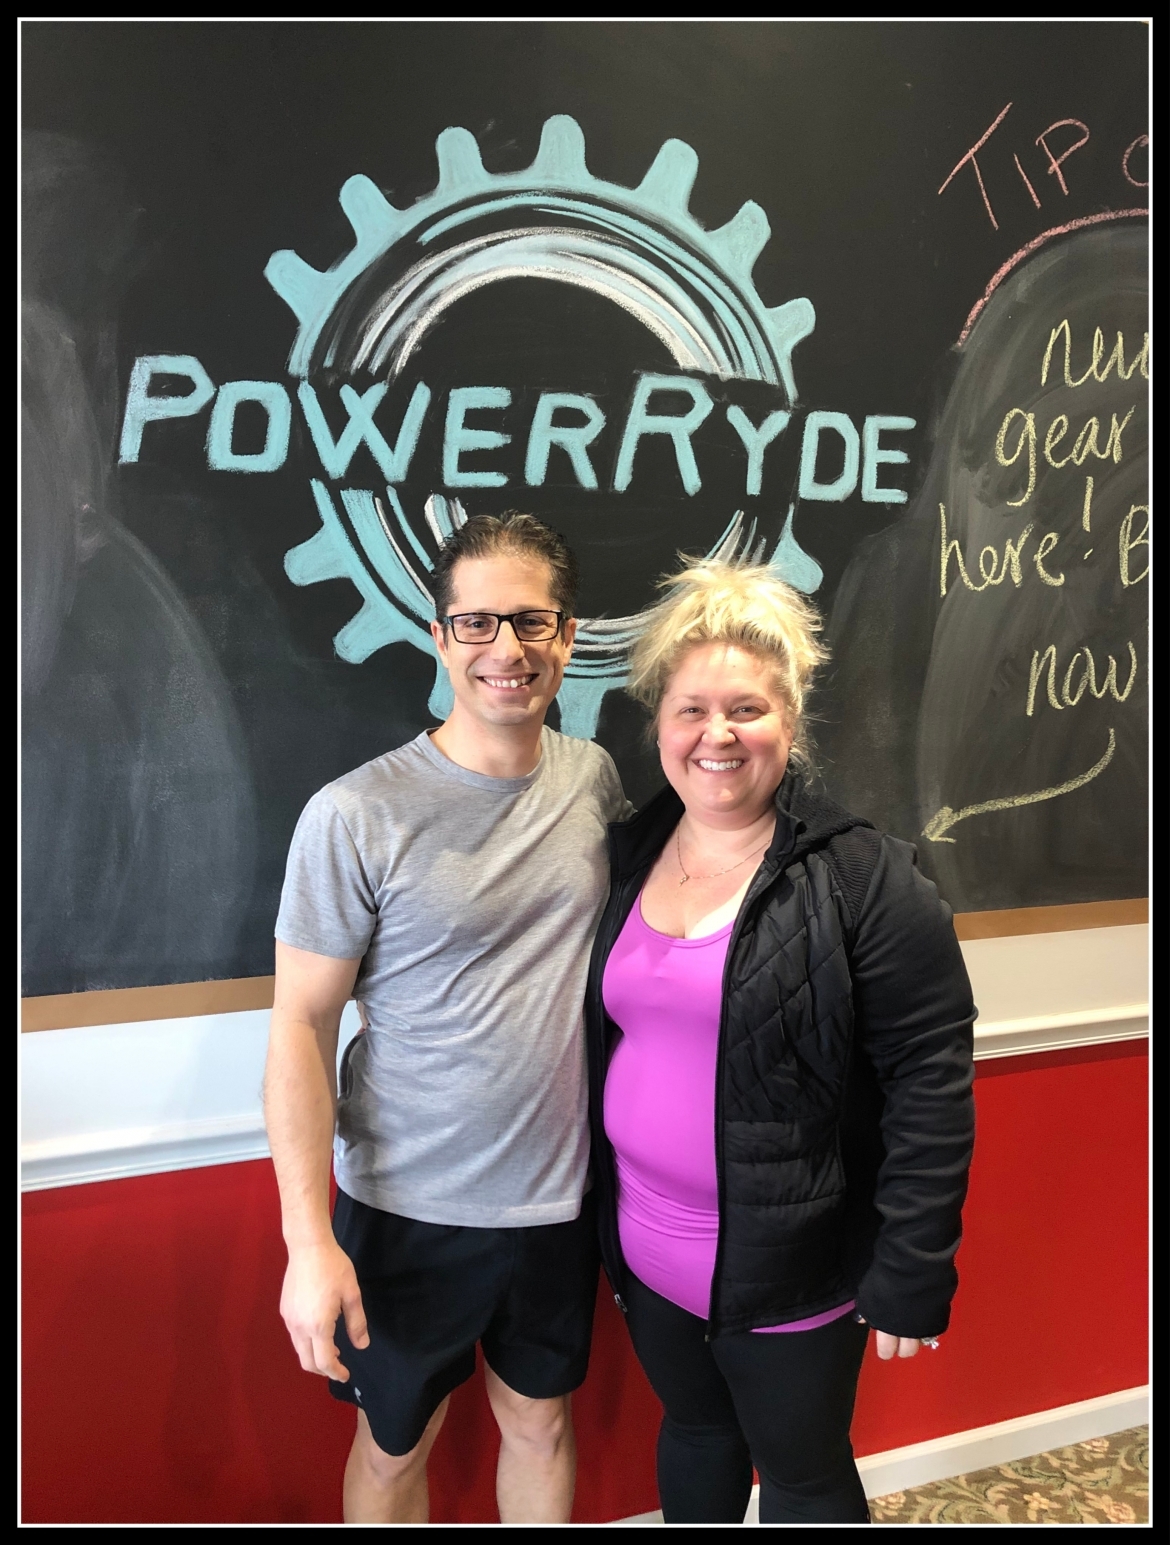 Stephanie and Michael Craig in front of chalk PowerRyde logo